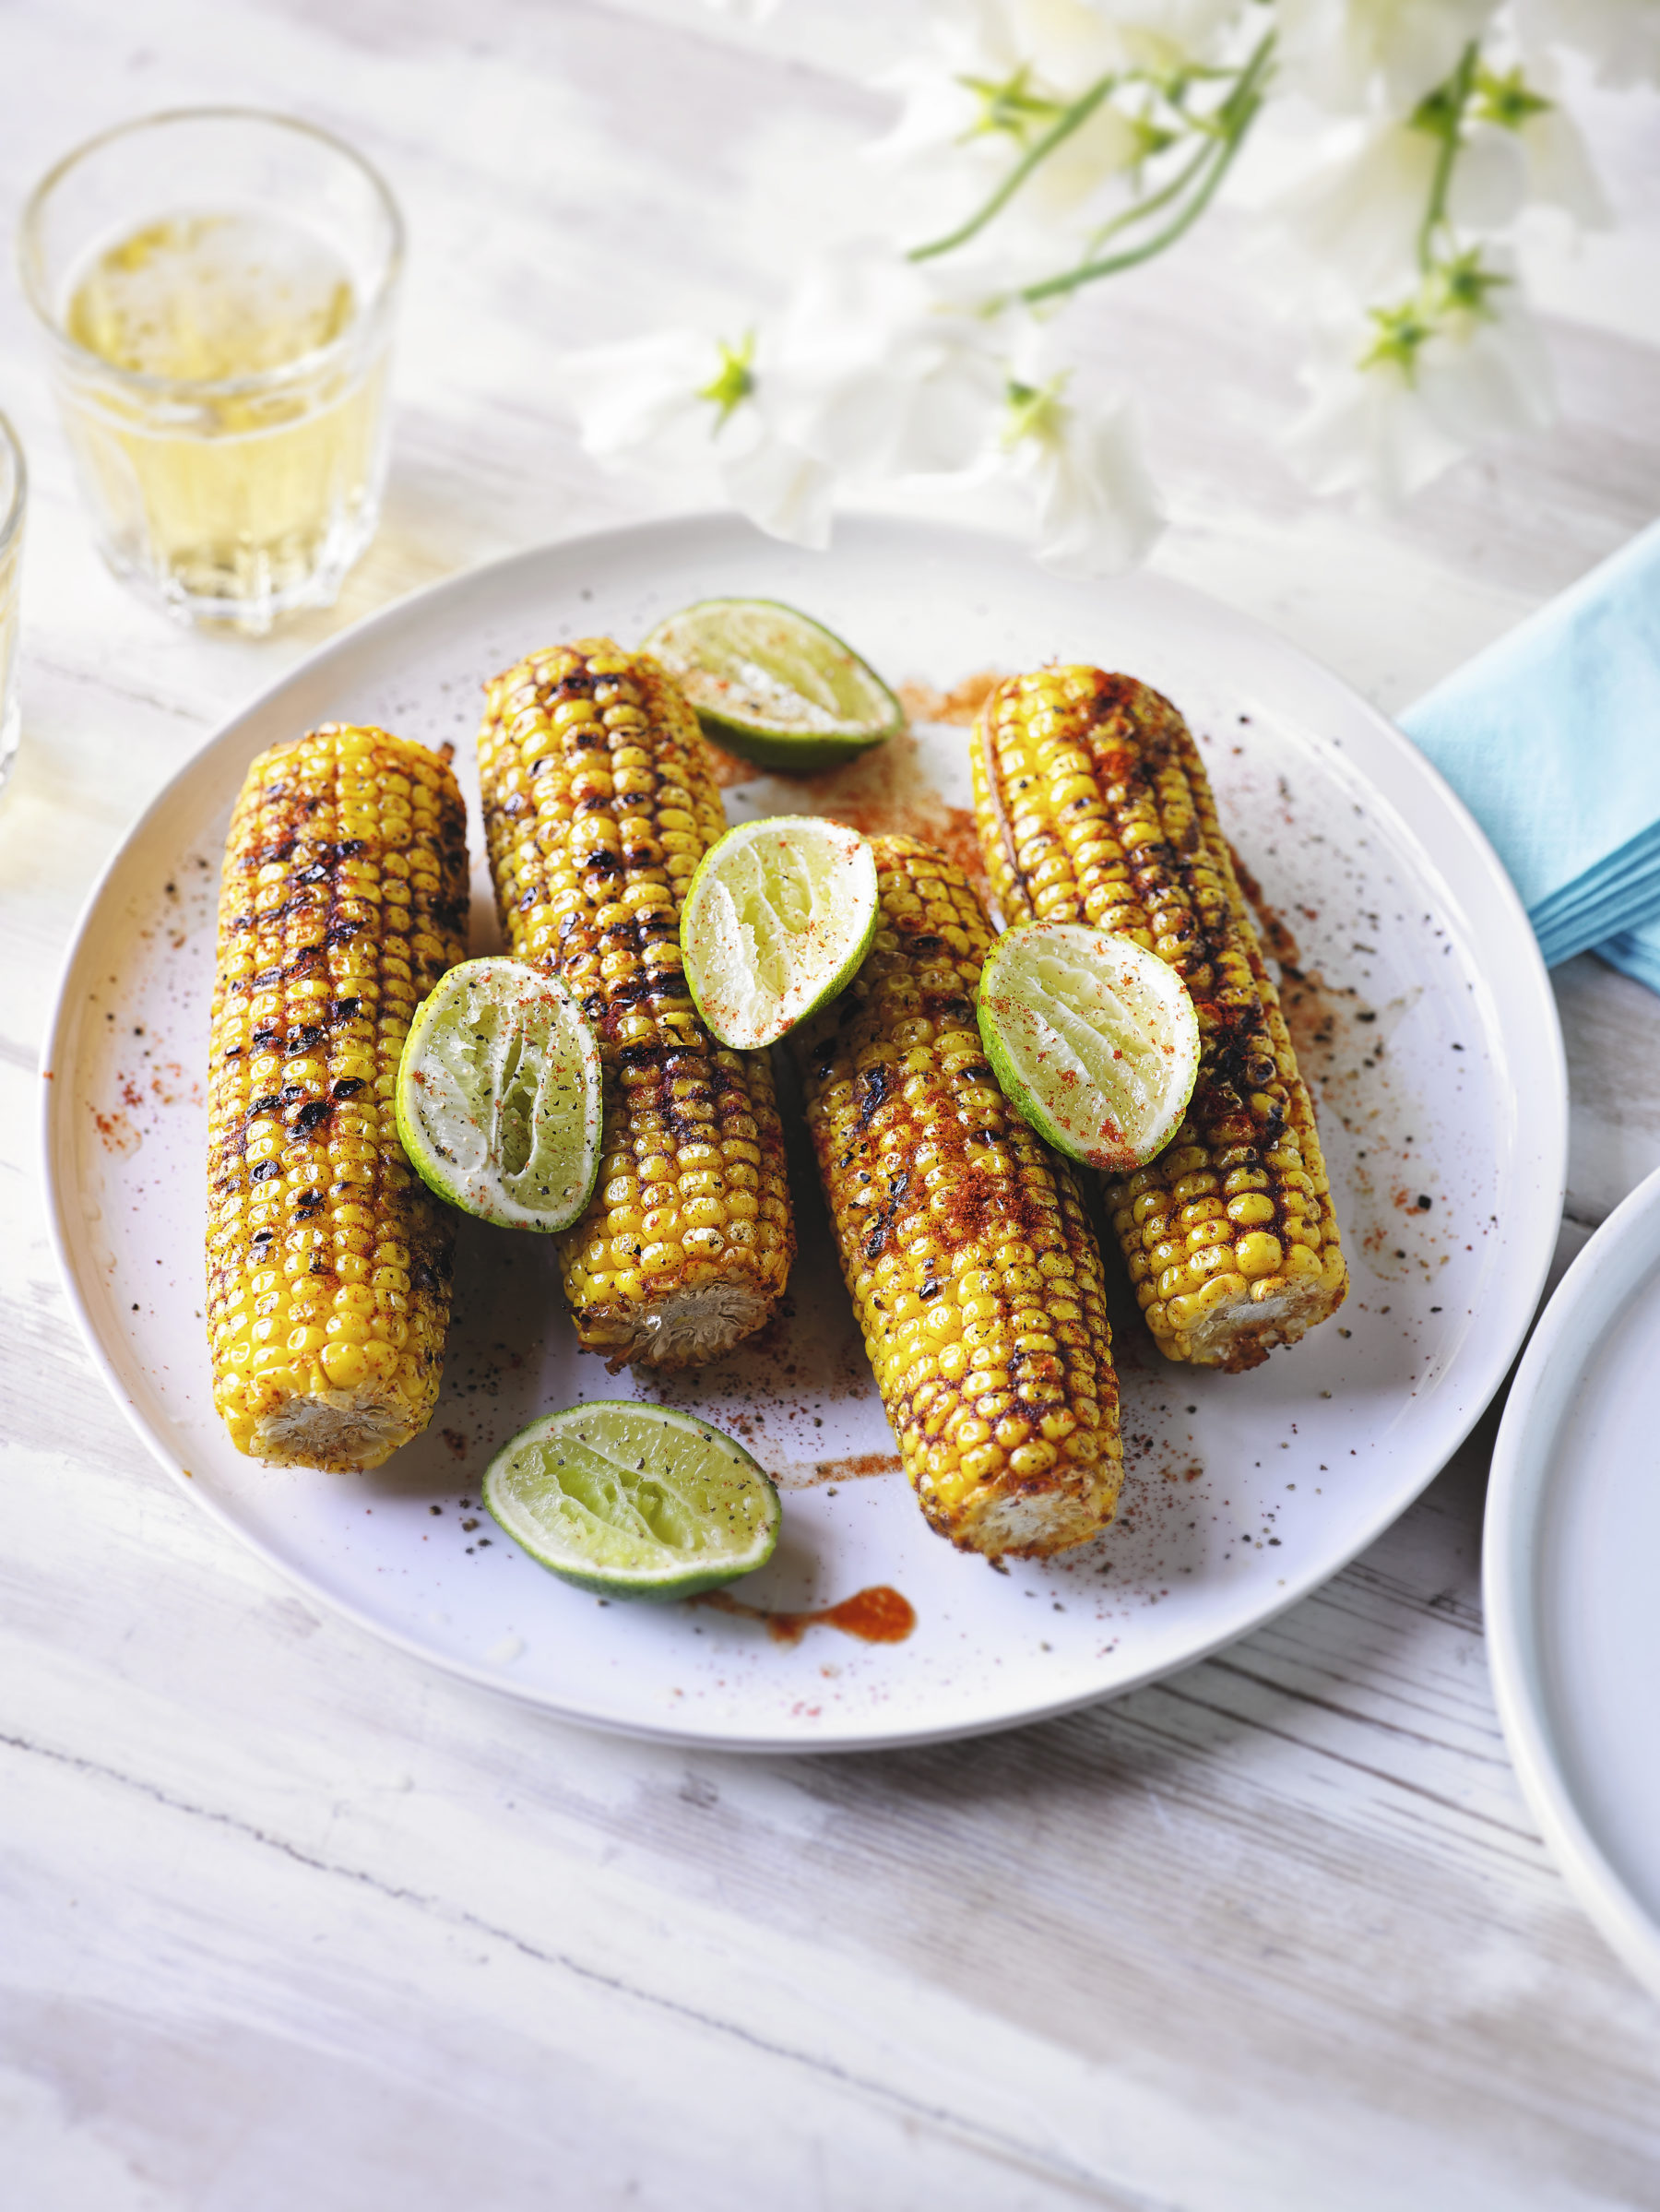 Barbecued Sweetcorn with a Smoky Rub